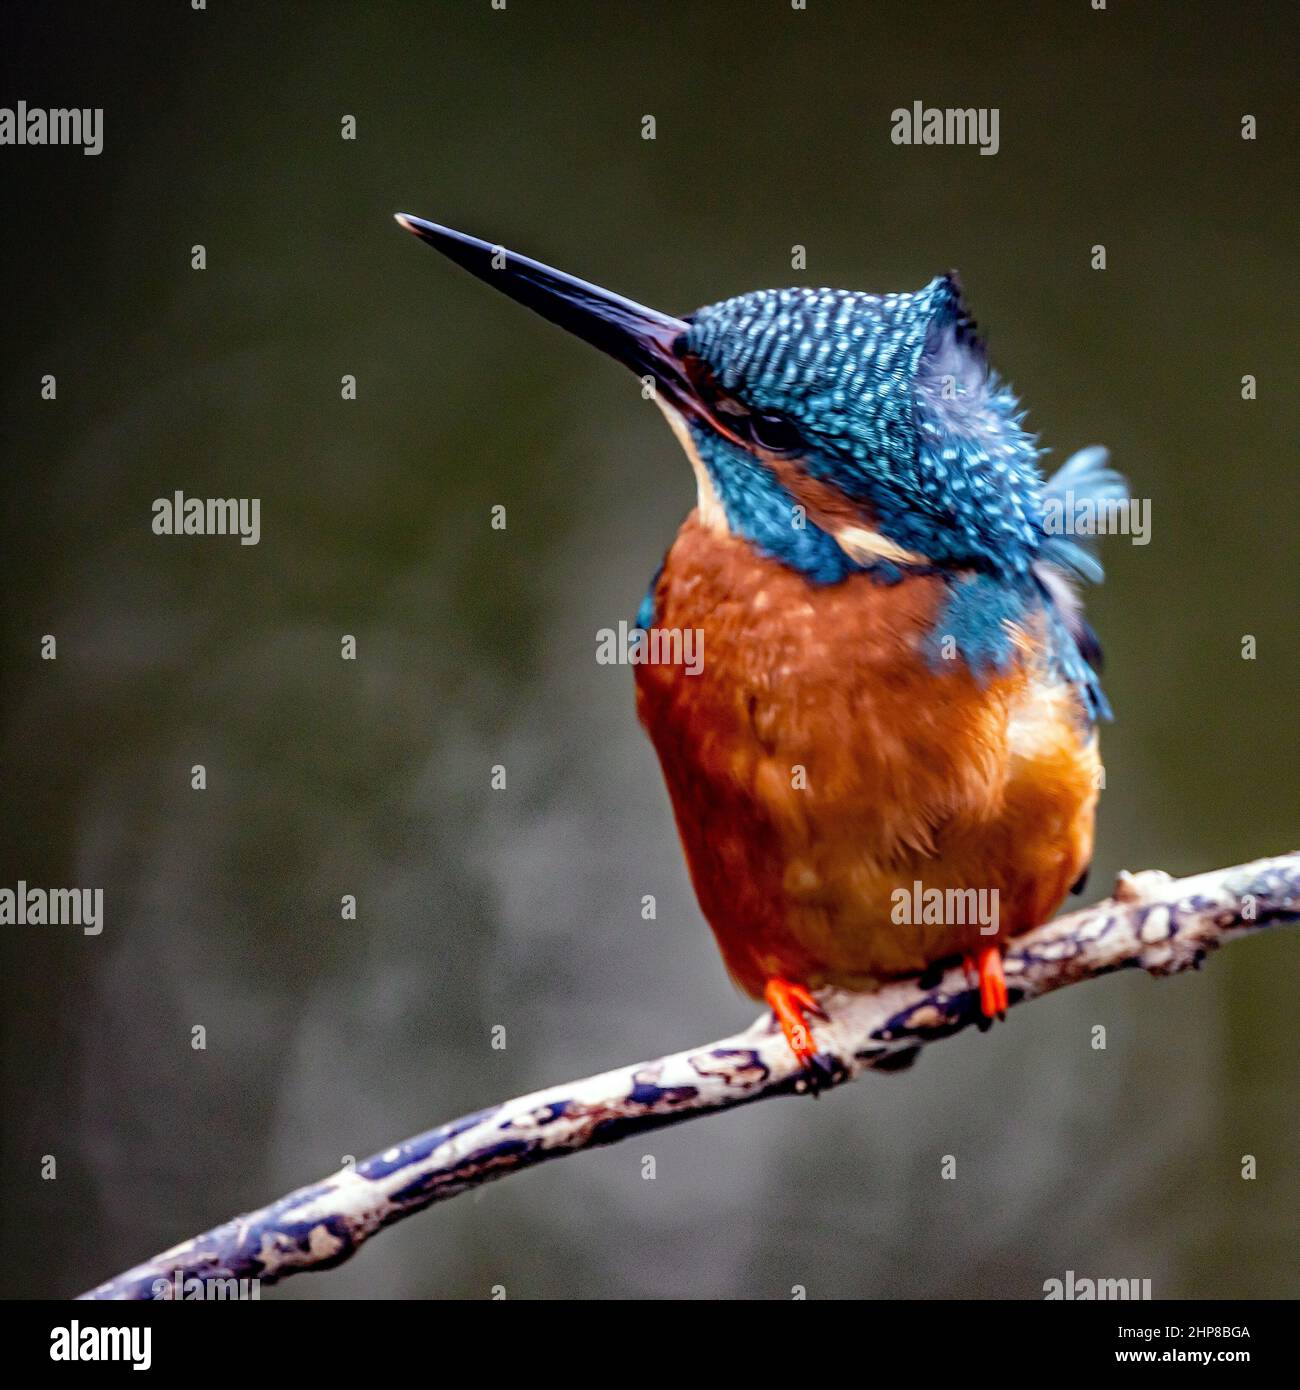 Closeup of a king fisher bird perched on a branch Stock Photo